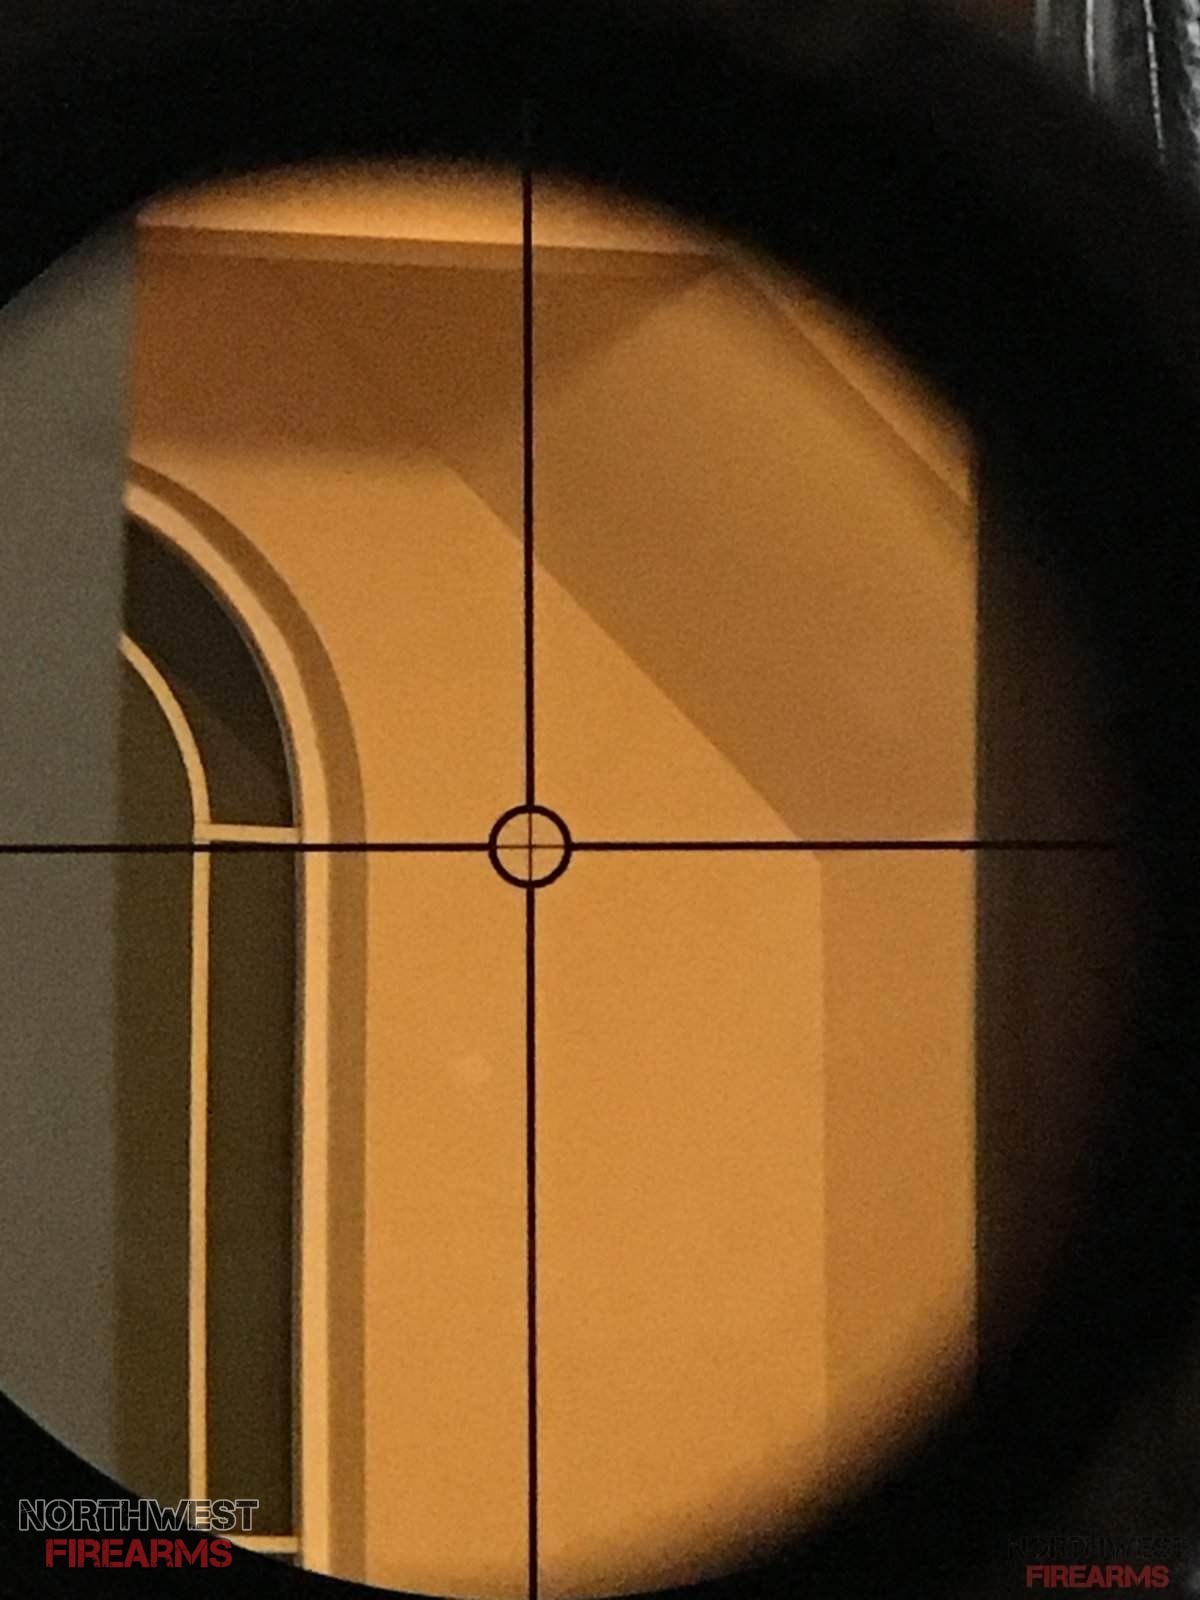 Bushnell reticle